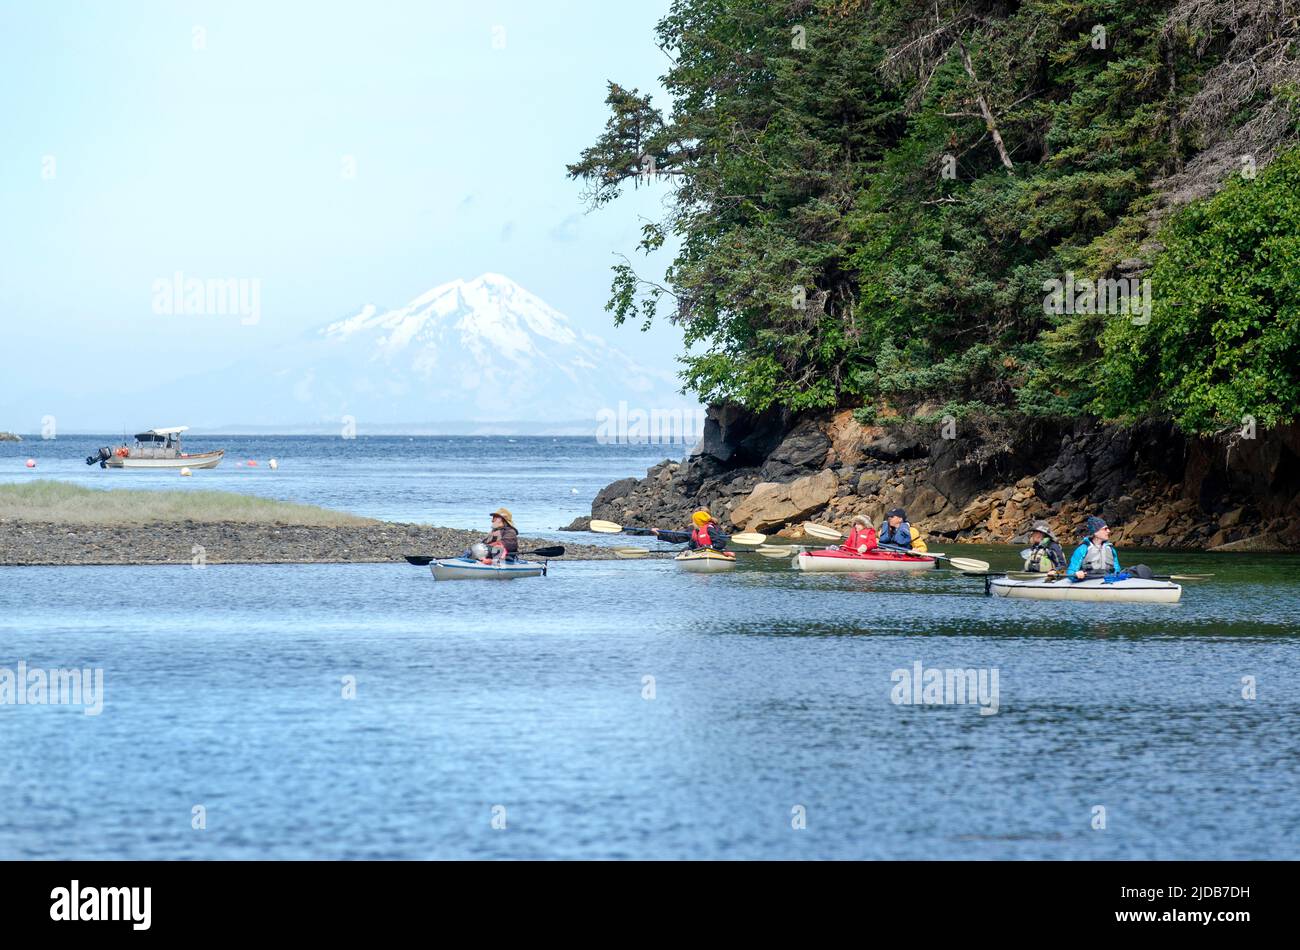 Kayakers paddle through a lagoon in Little Tutka Bay, in Kachemak Bay,  with Mount Redoubt volcano in the background. Jim Lavrakas/Far North Photo Stock Photo